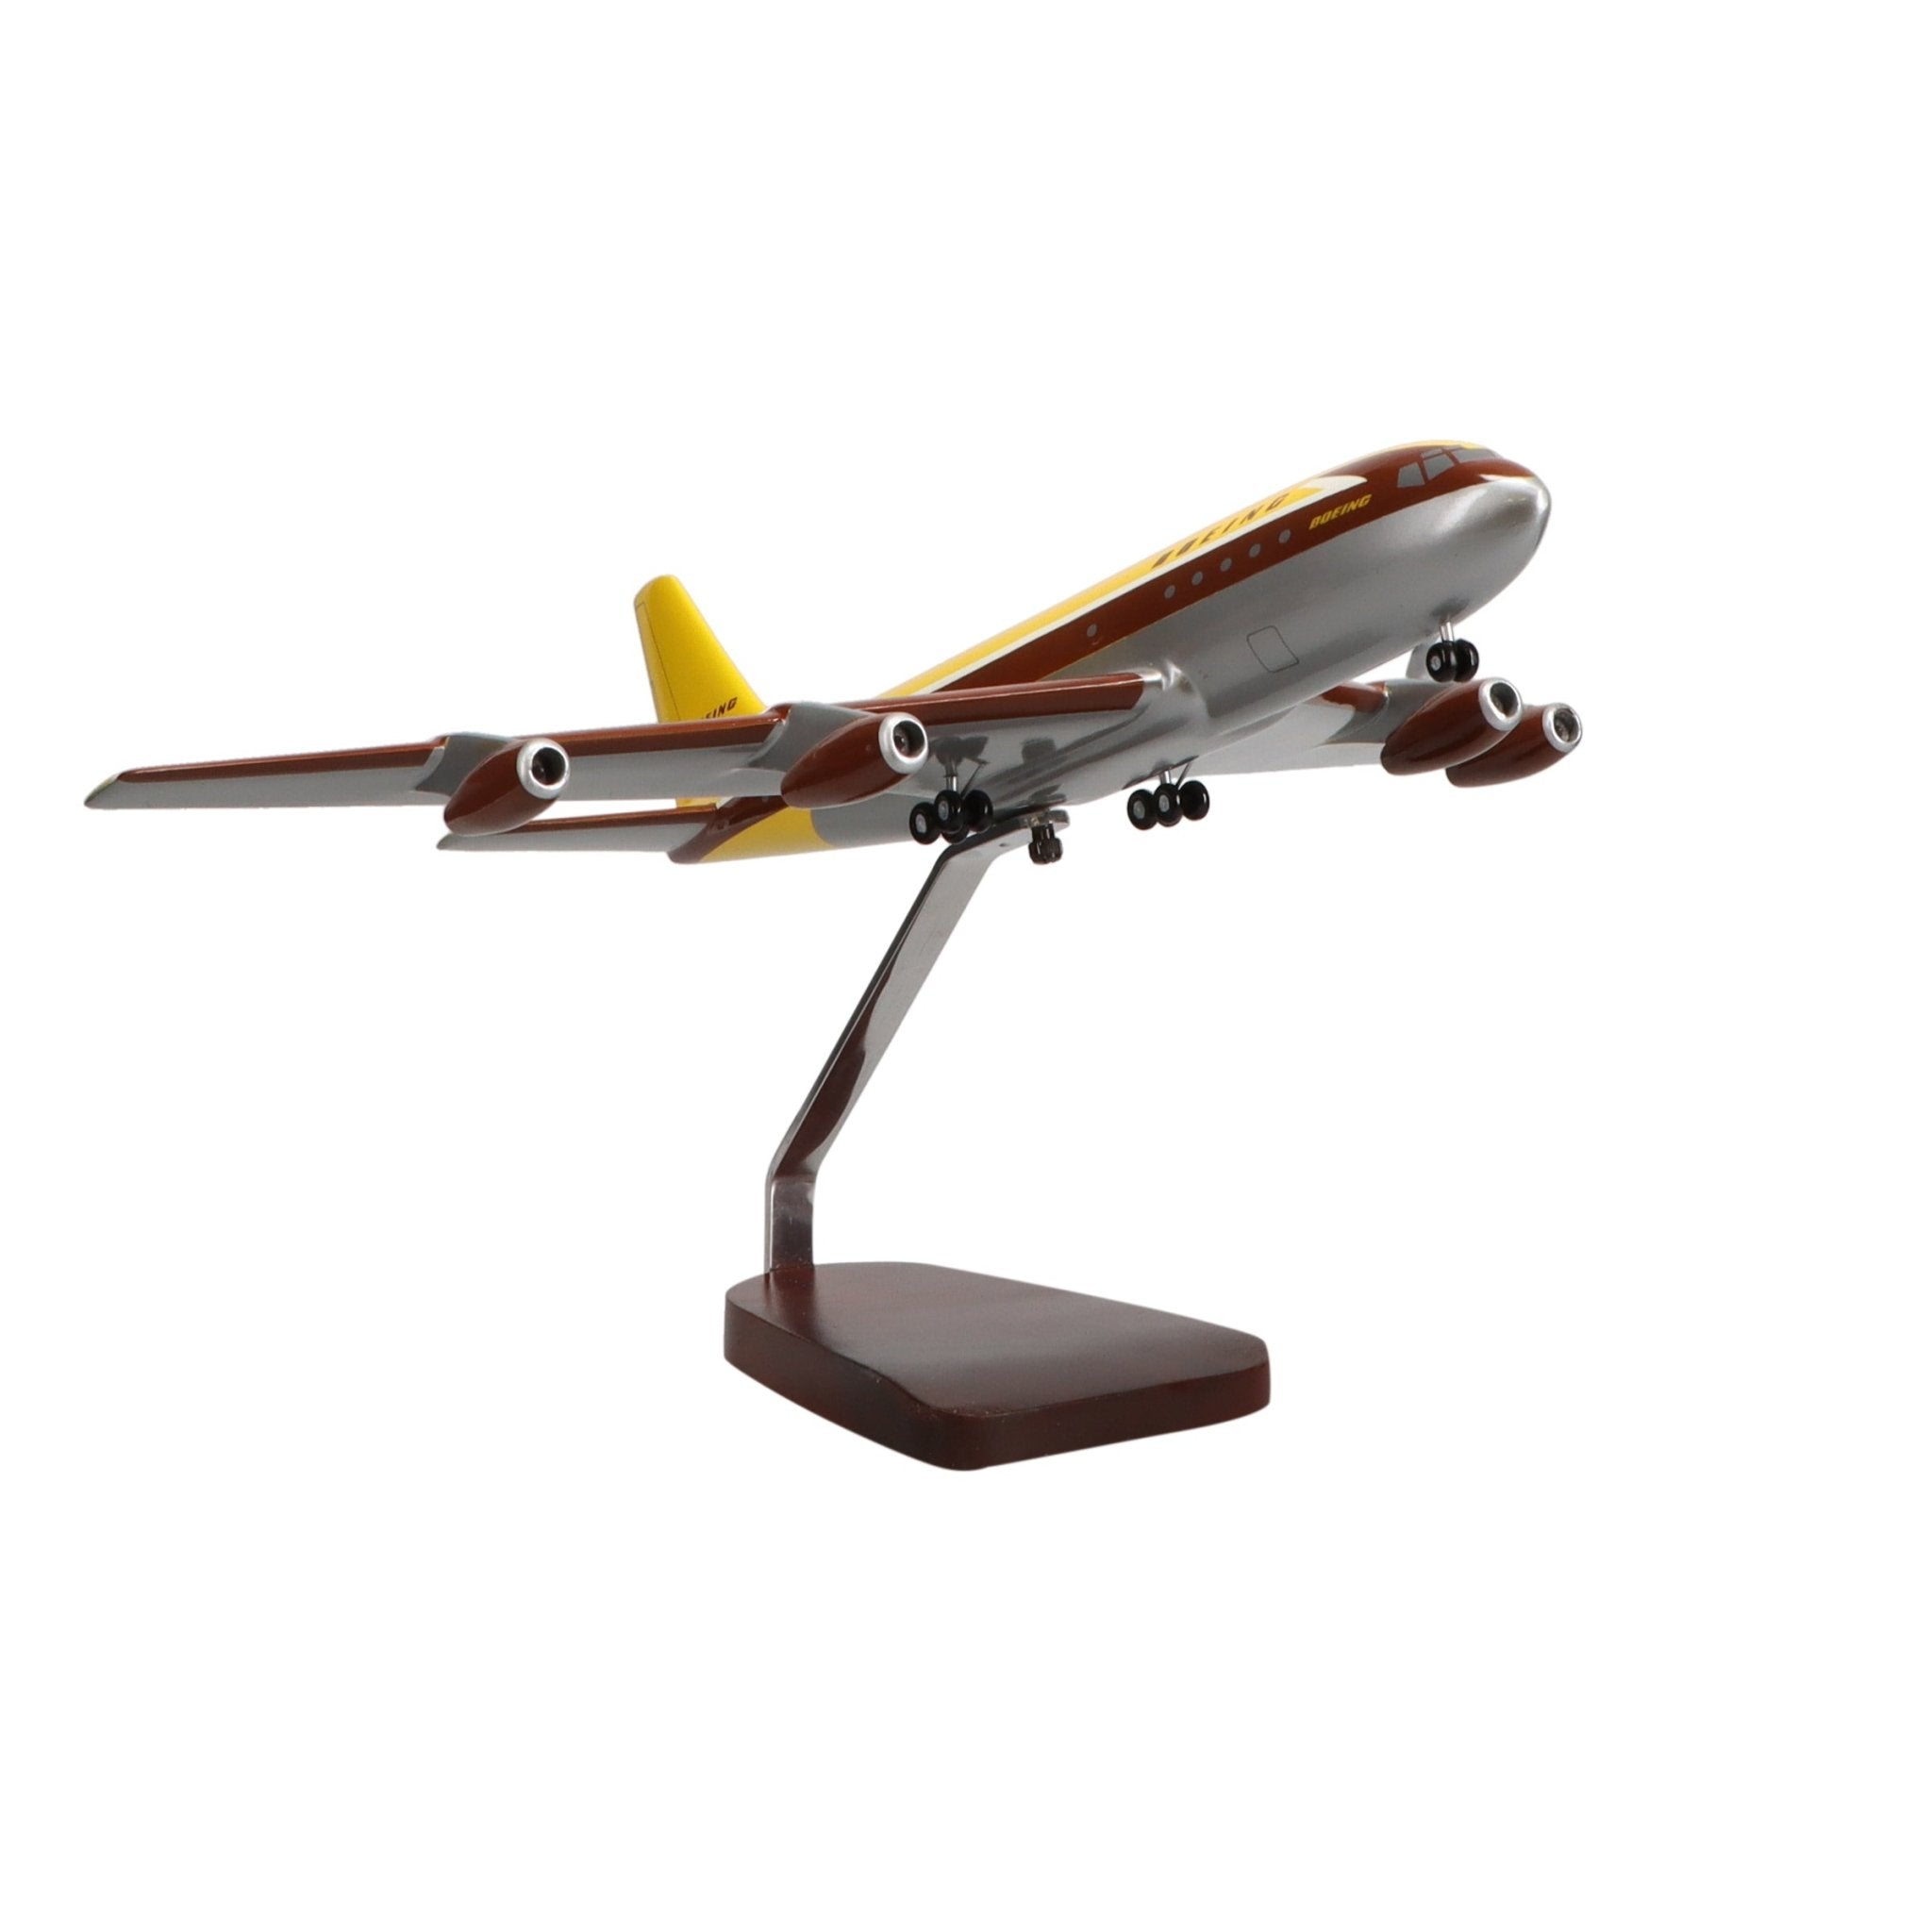 Boeing 707 (Factory Prototype 367-80) Limited Edition Large Mahogany Model - PilotMall.com